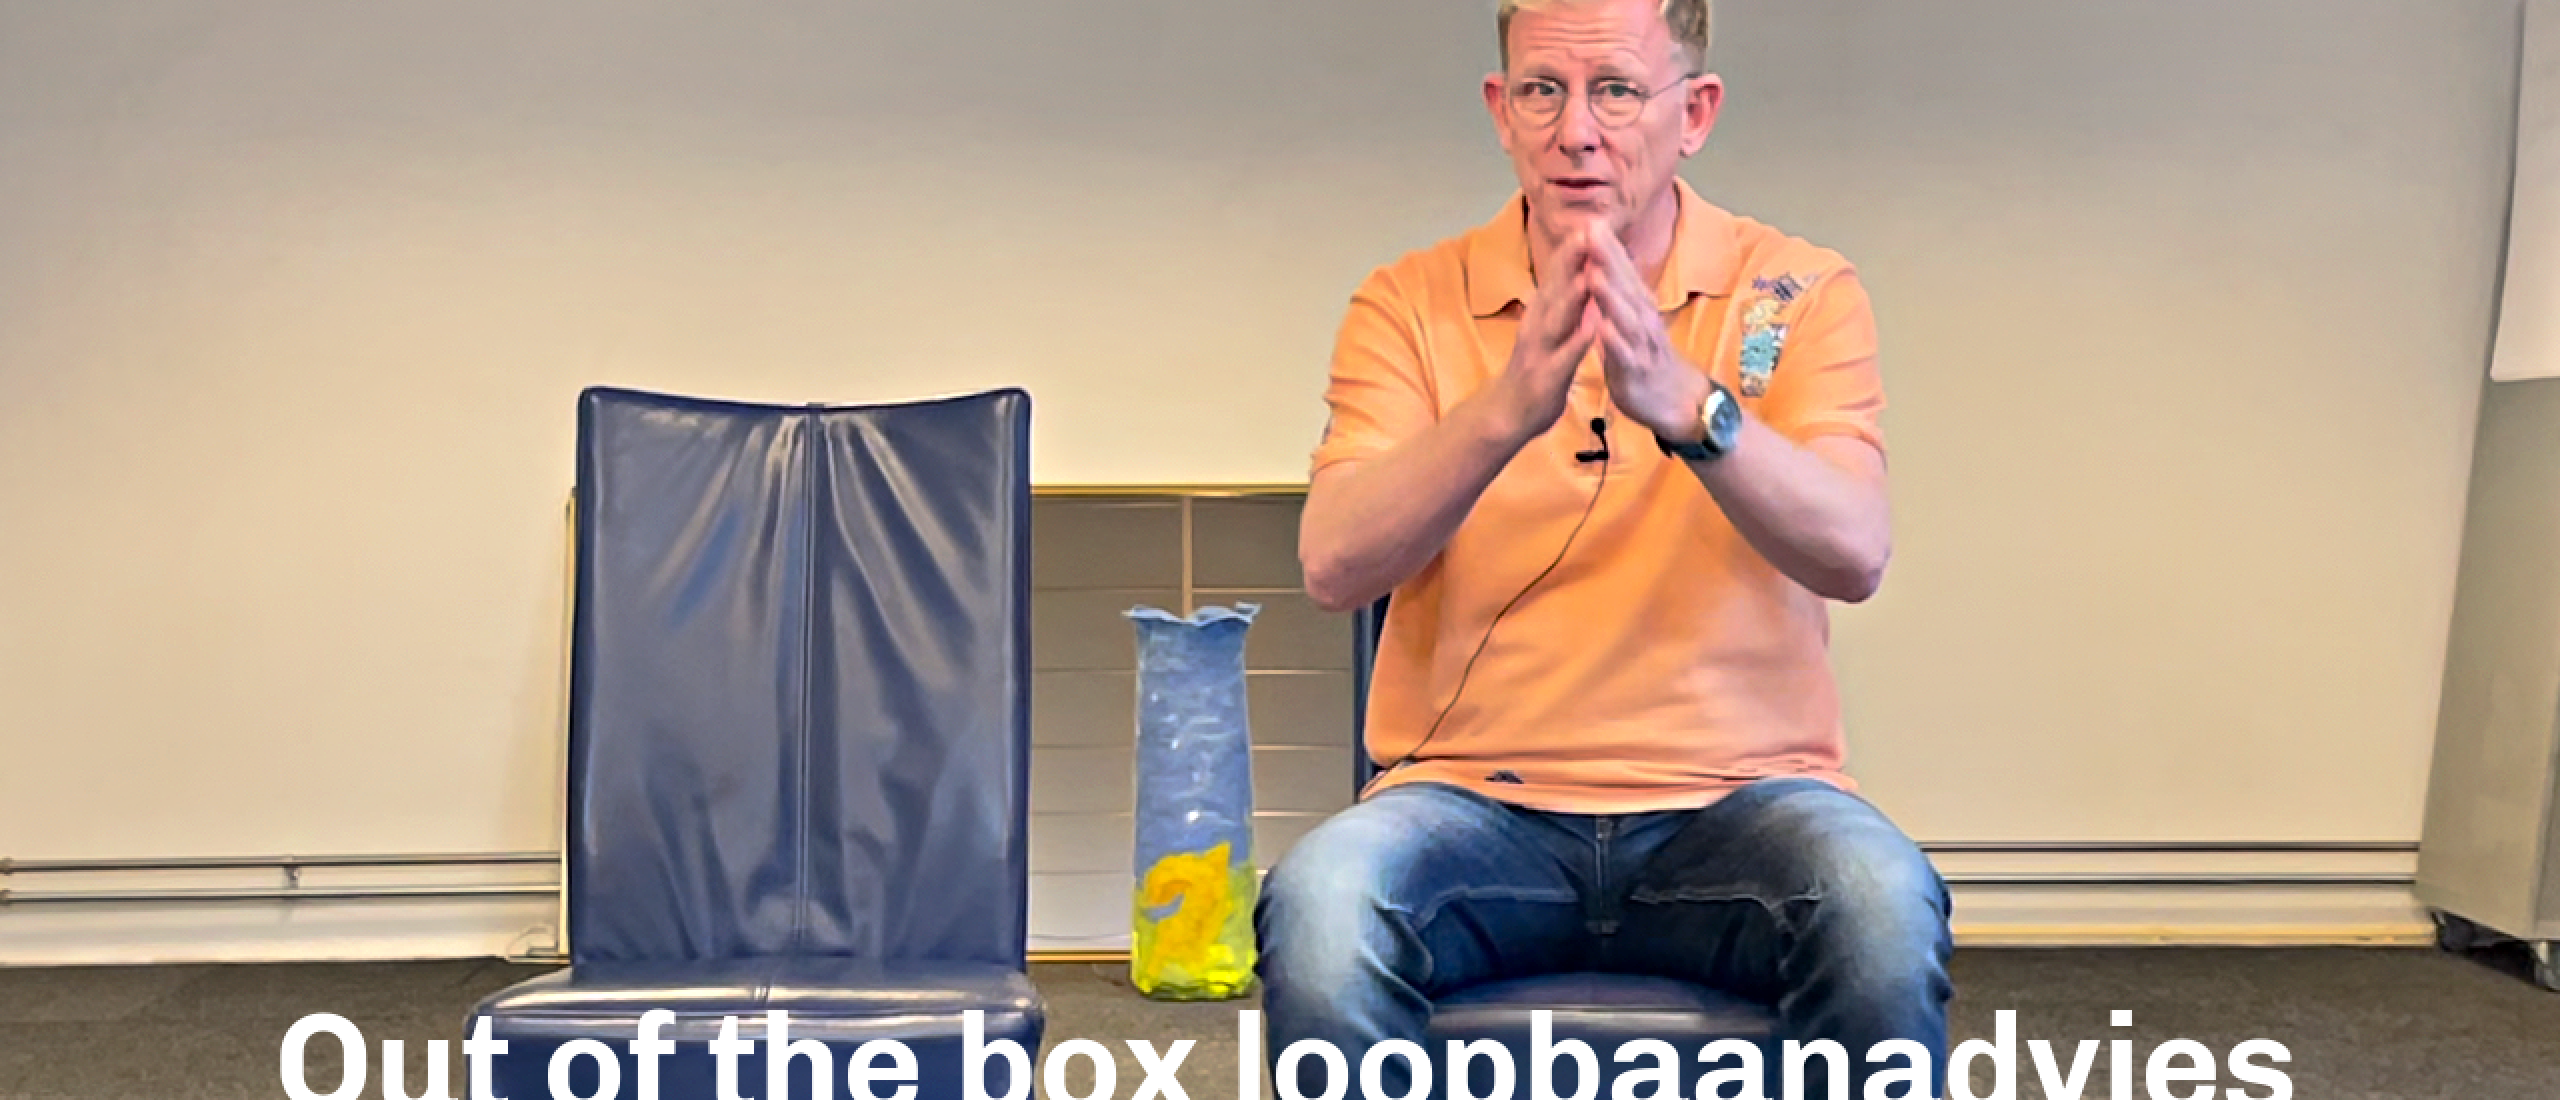 Out of the box loopbaanadvies in Utrecht nodig?